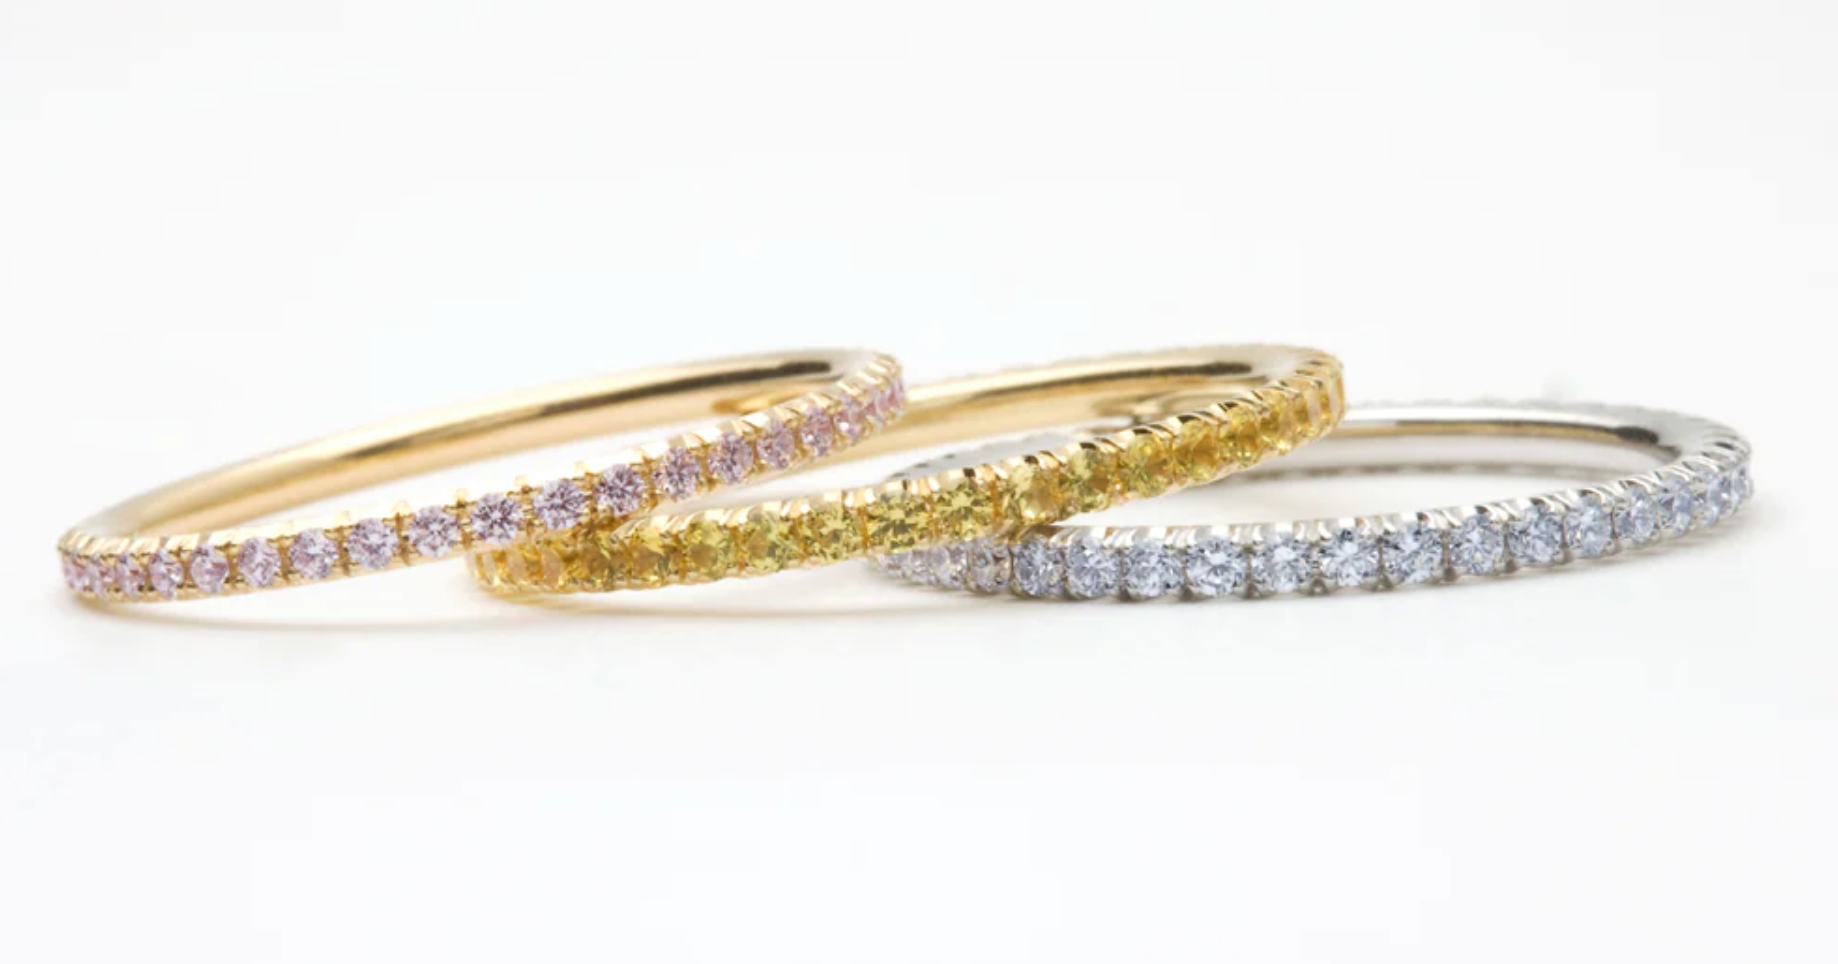 Eternity rings with Pink, Yellow, and Blue diamonds.